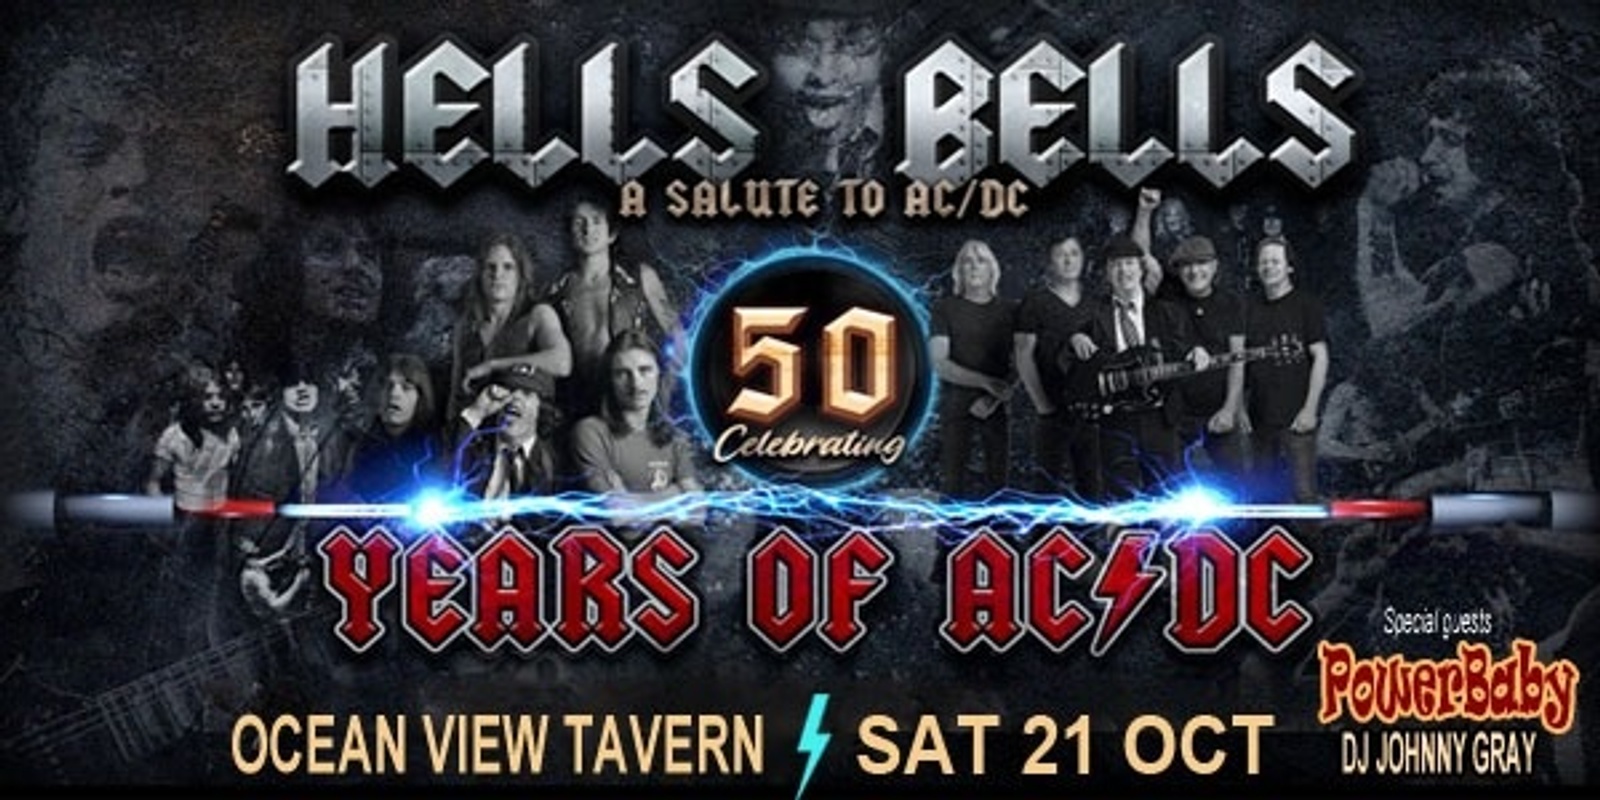 Banner image for  HELLS BELLS' AC/DC's 50th Anniversary Show - Ocean View Tavern Sat 21 Oct